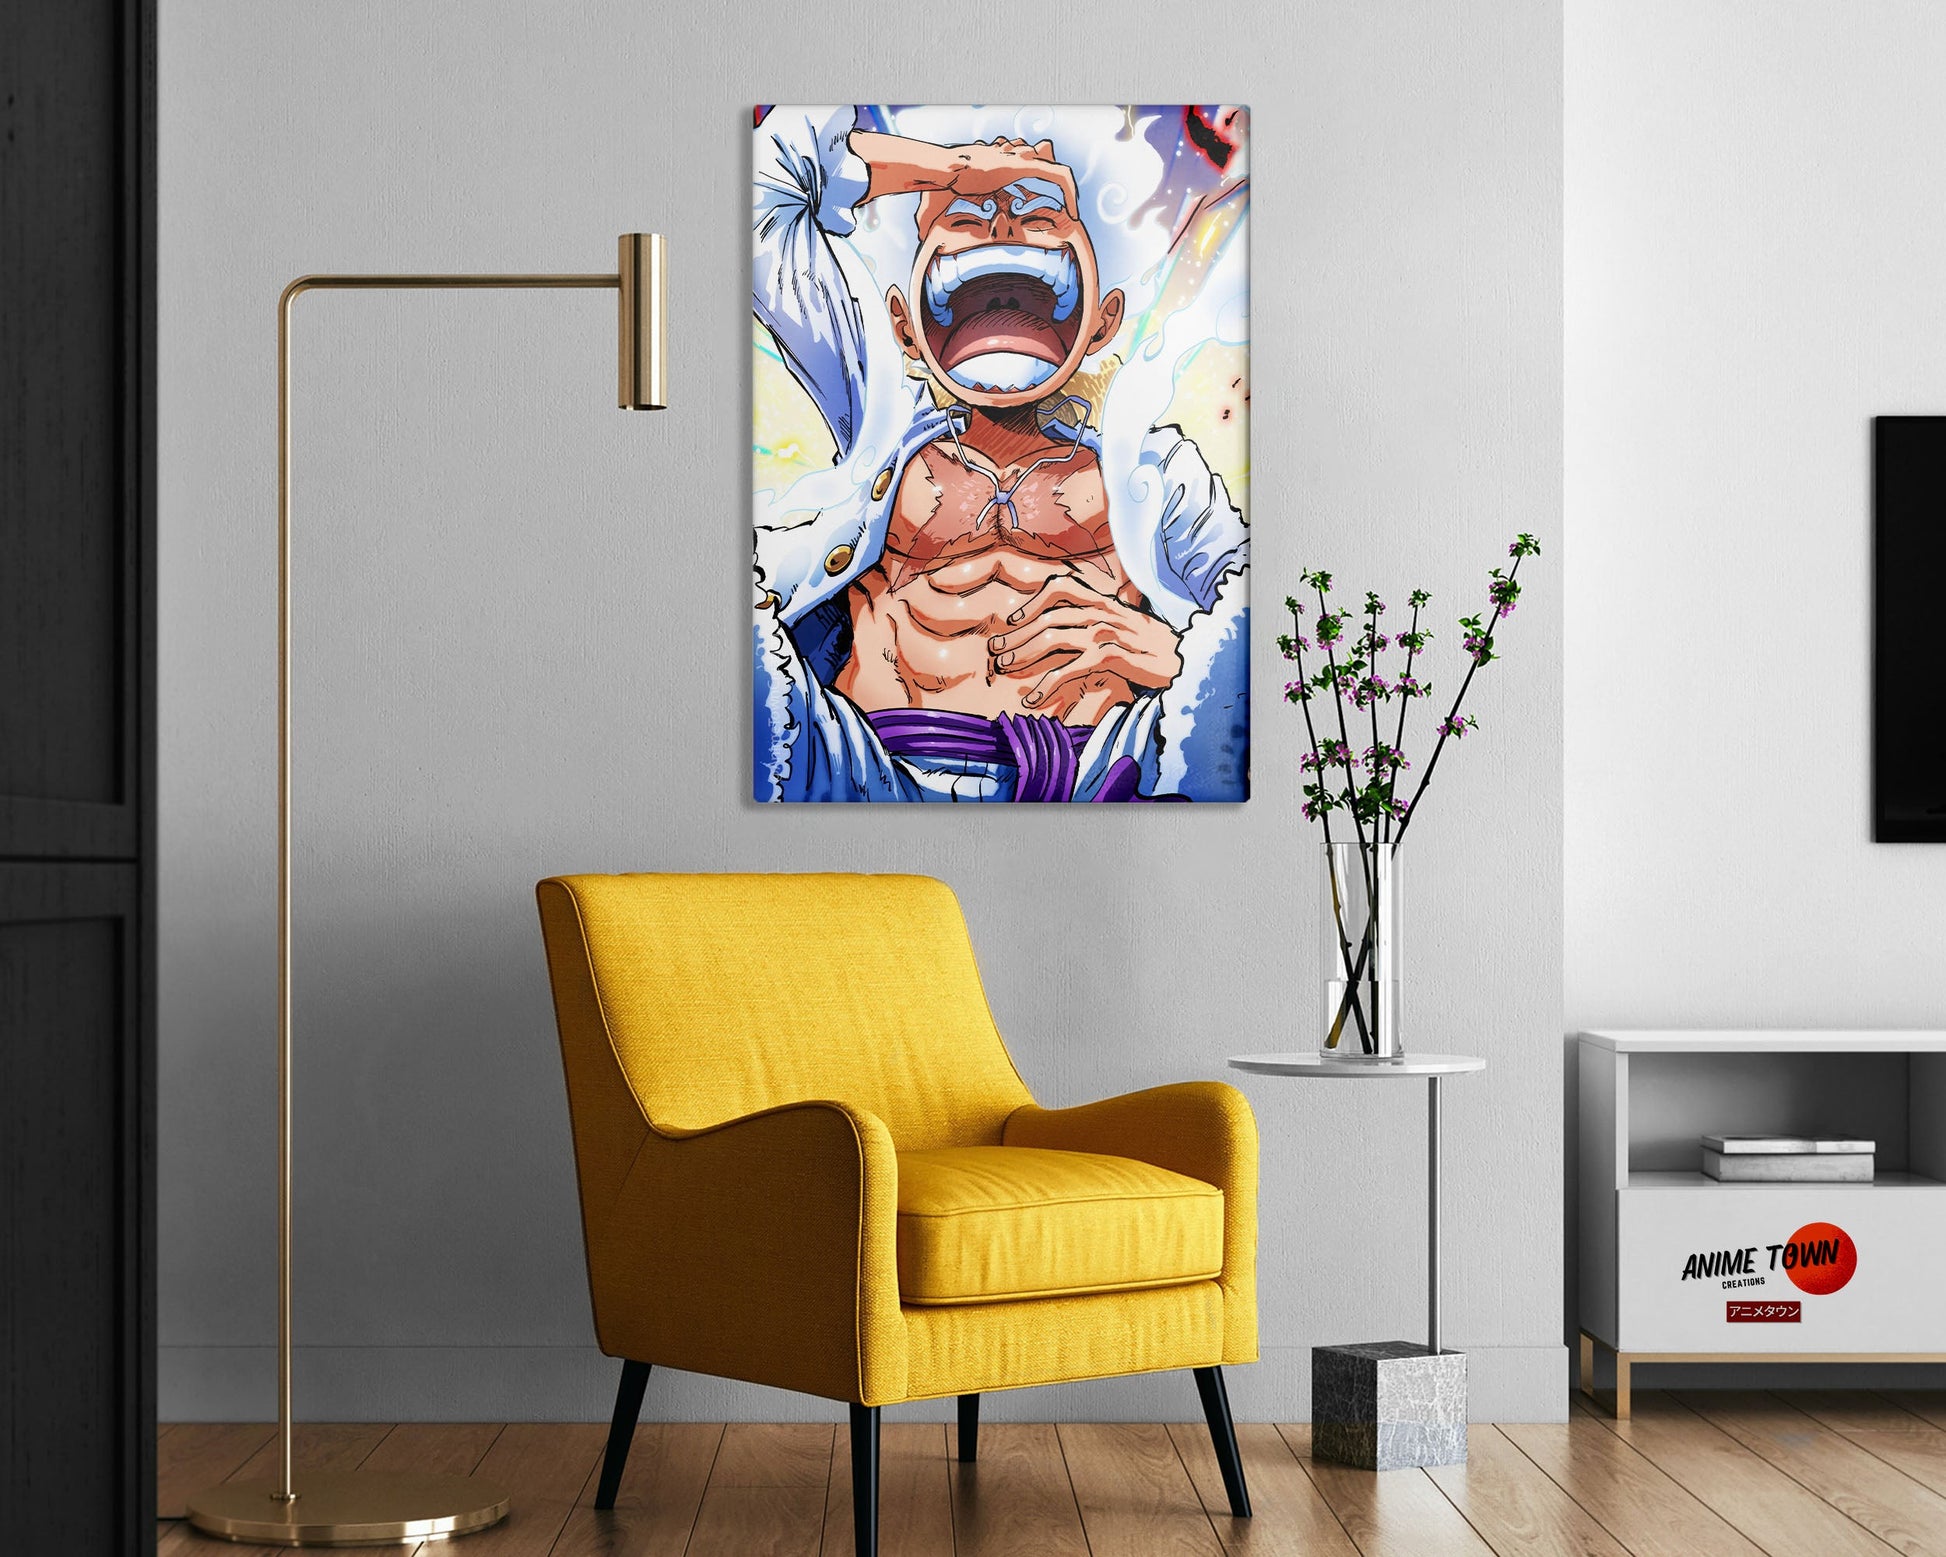 Anime Town Creations Metal Poster One Piece Luffy Gear 5 Awakening 24" x 36" Home Goods - Anime One Piece Metal Poster